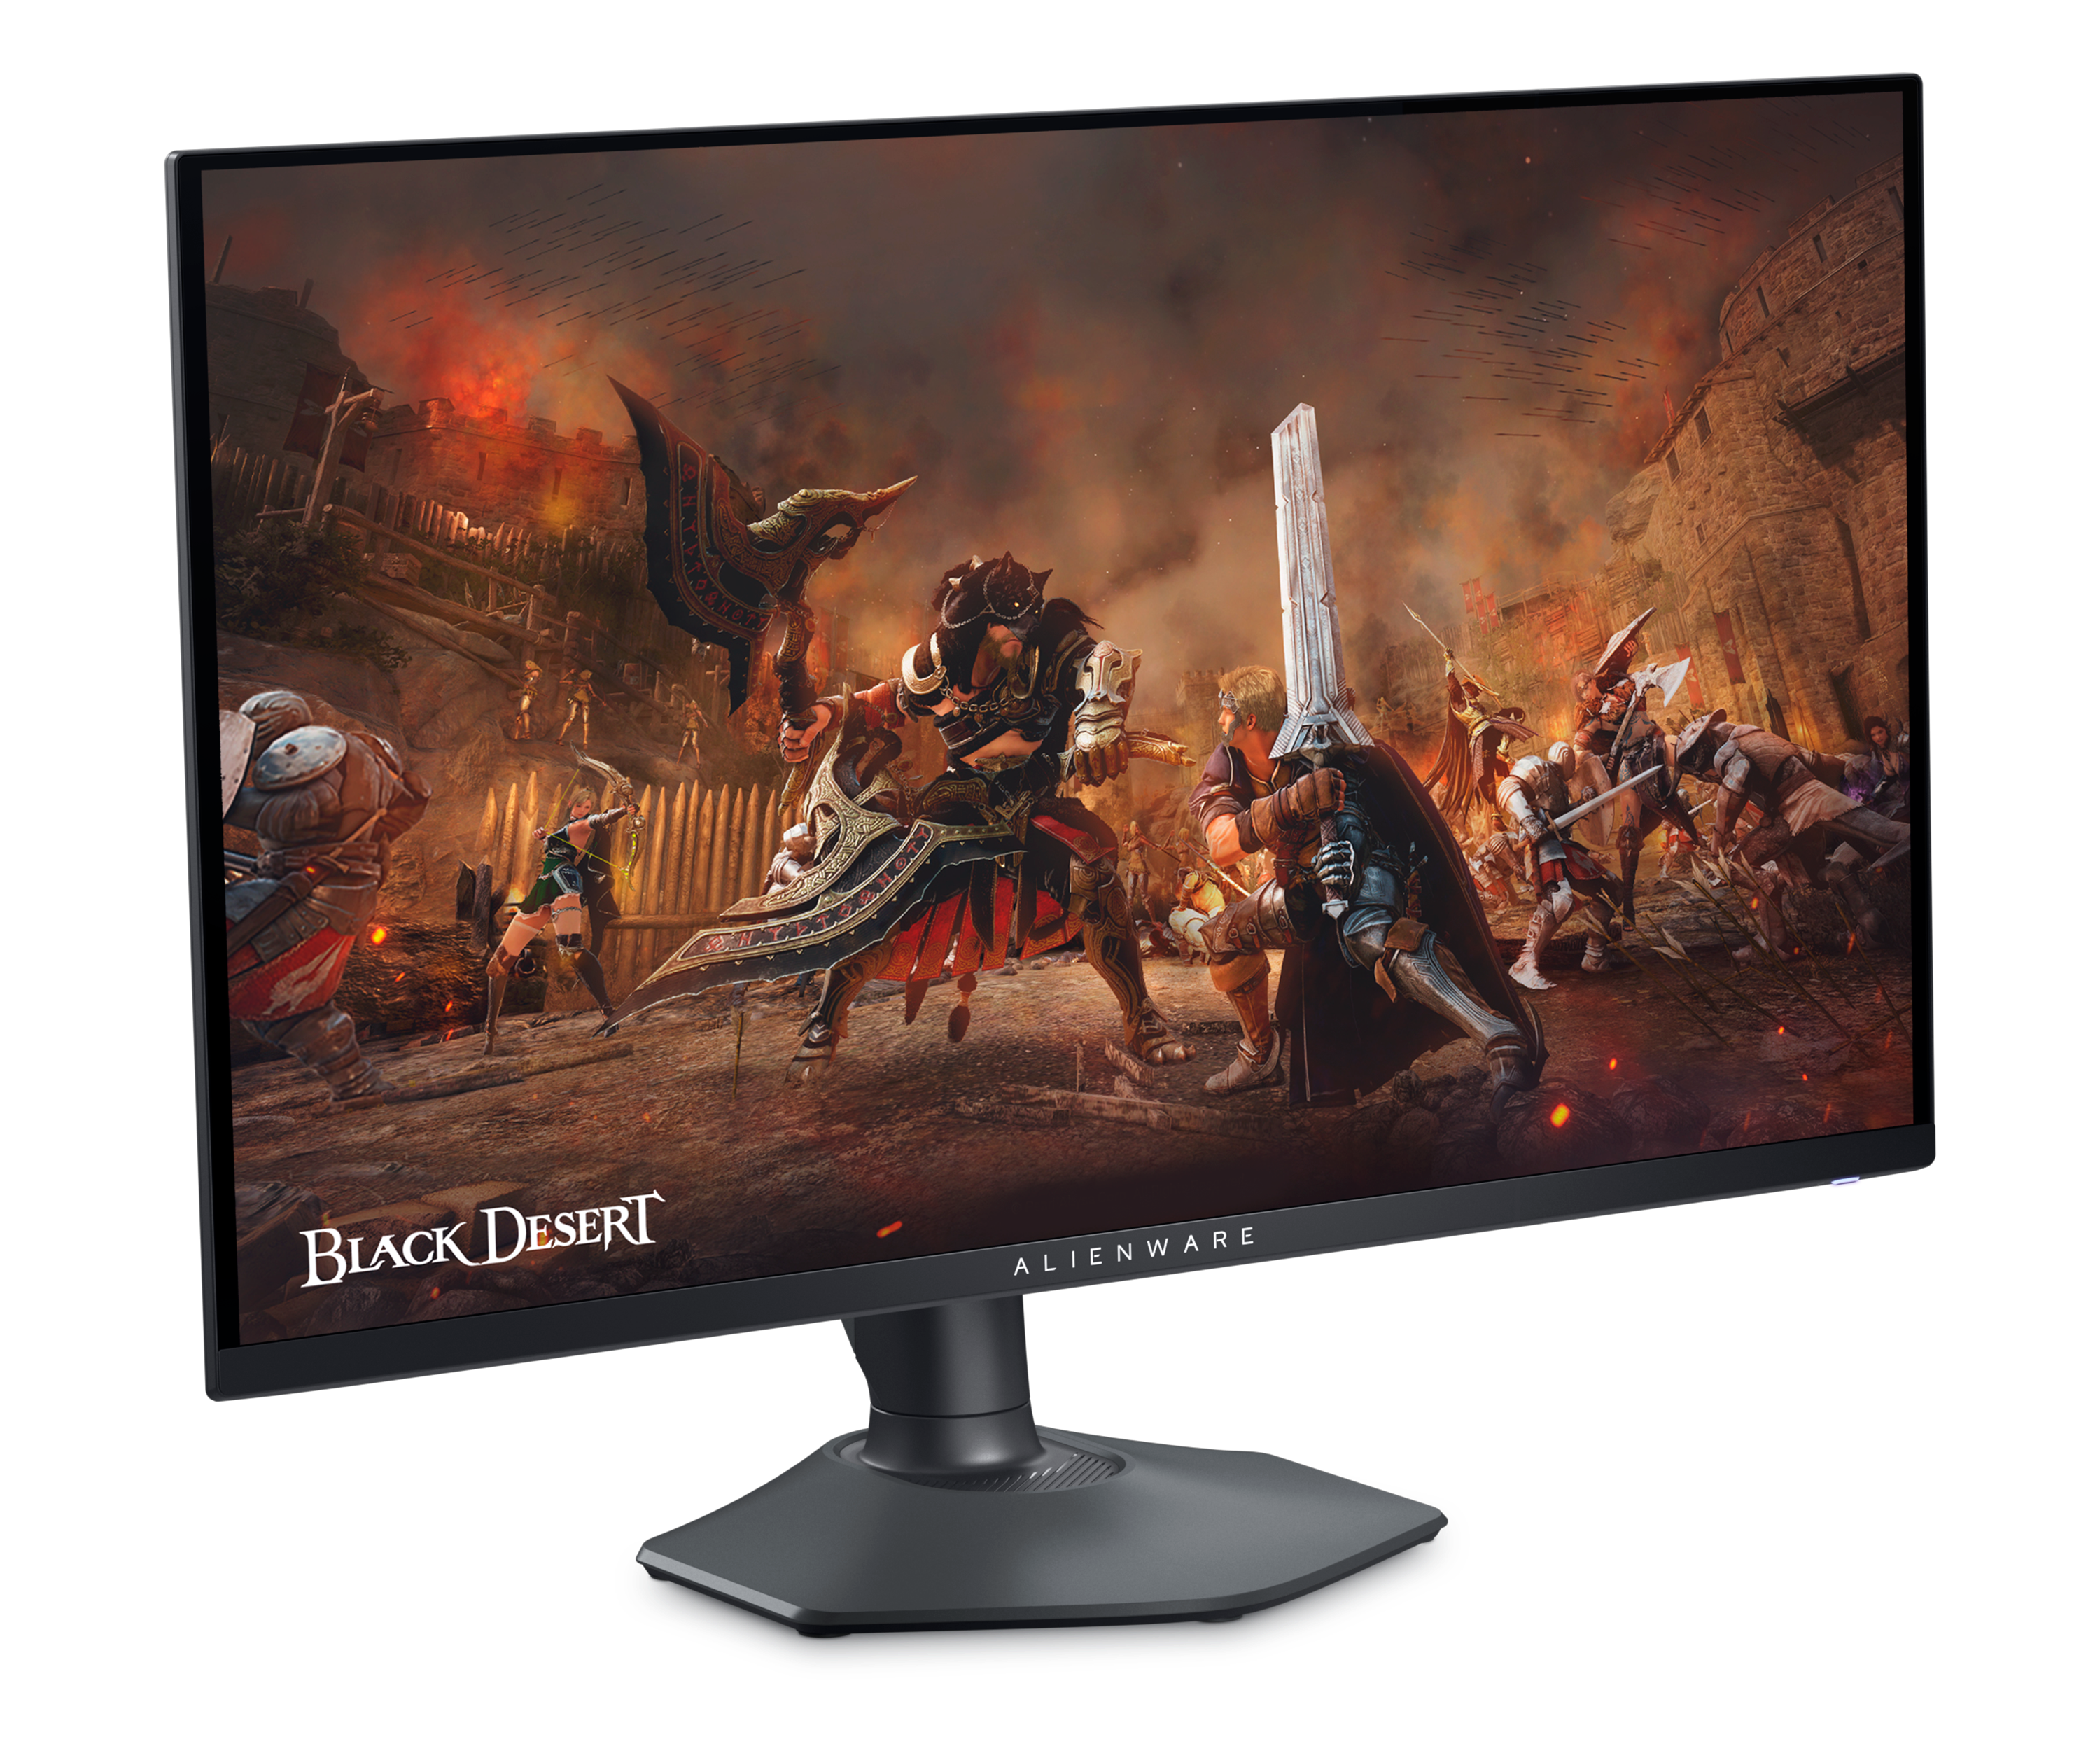 Dell AW2725DF Gaming Monitor with a Black Desert game image on the screen.